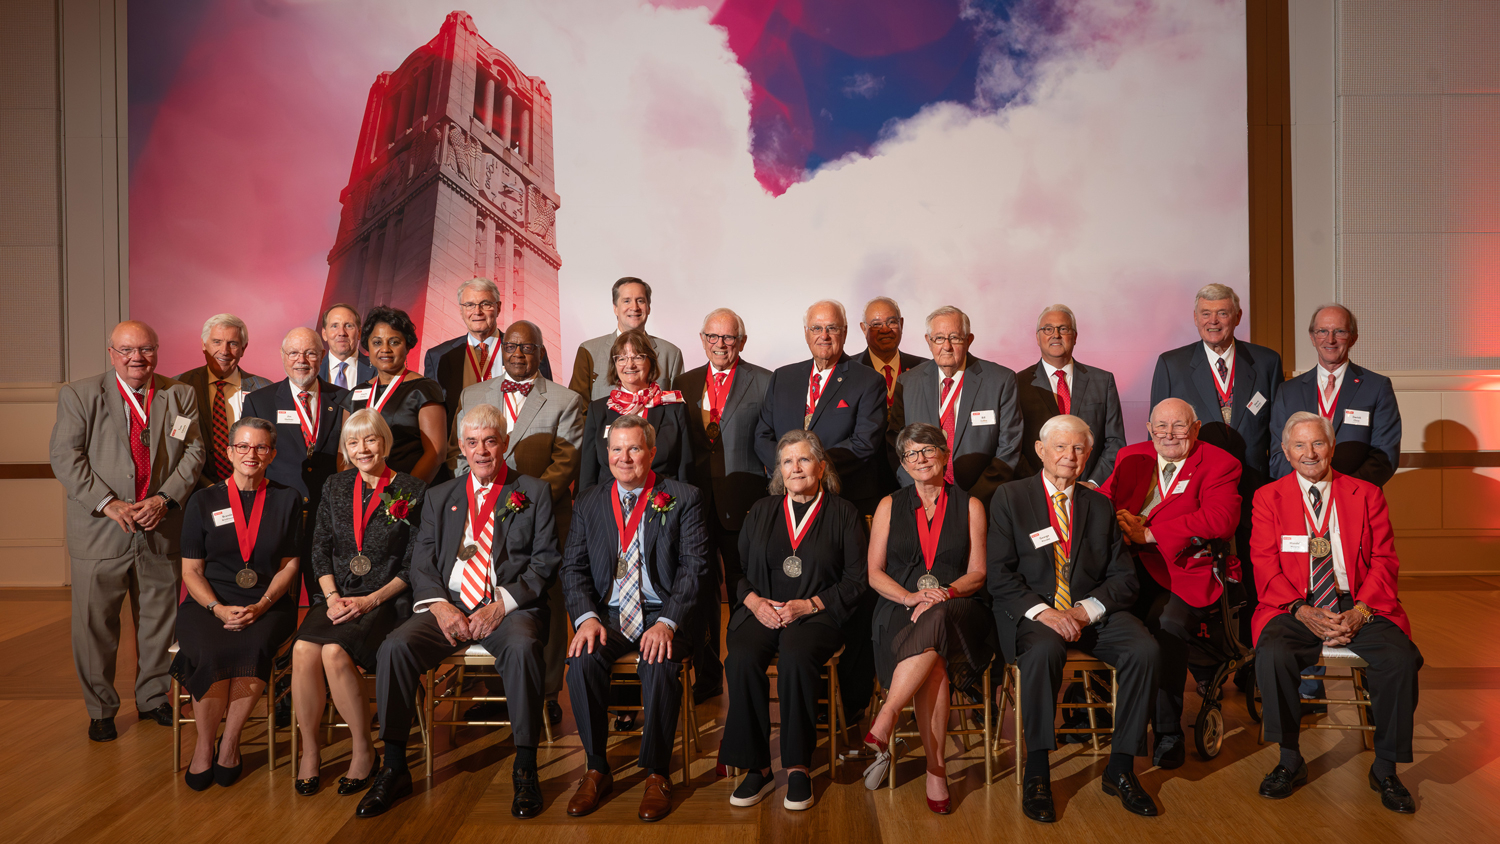 Cathy Sigal, Tom Stafford and Mike Constantino — second, third and fourth from the left on the front row, respectively — pose for a photo with past Watauga Medal recipients, members of the NC State University Foundation’s Board of Trustees and other university leaders at the 2023 ceremony. Photo by Marc Hall